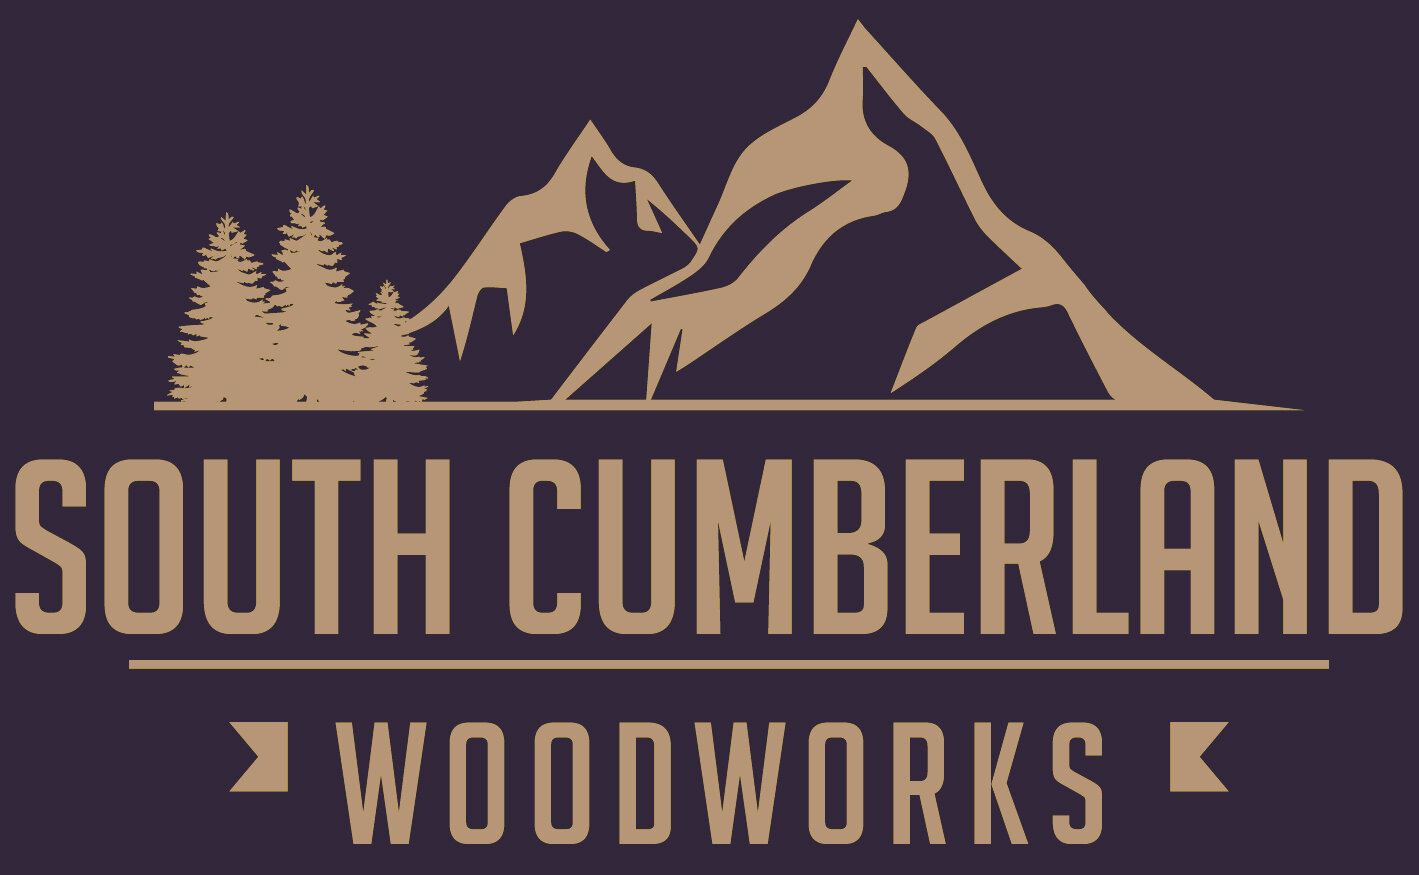 South Cumberland Woodworks